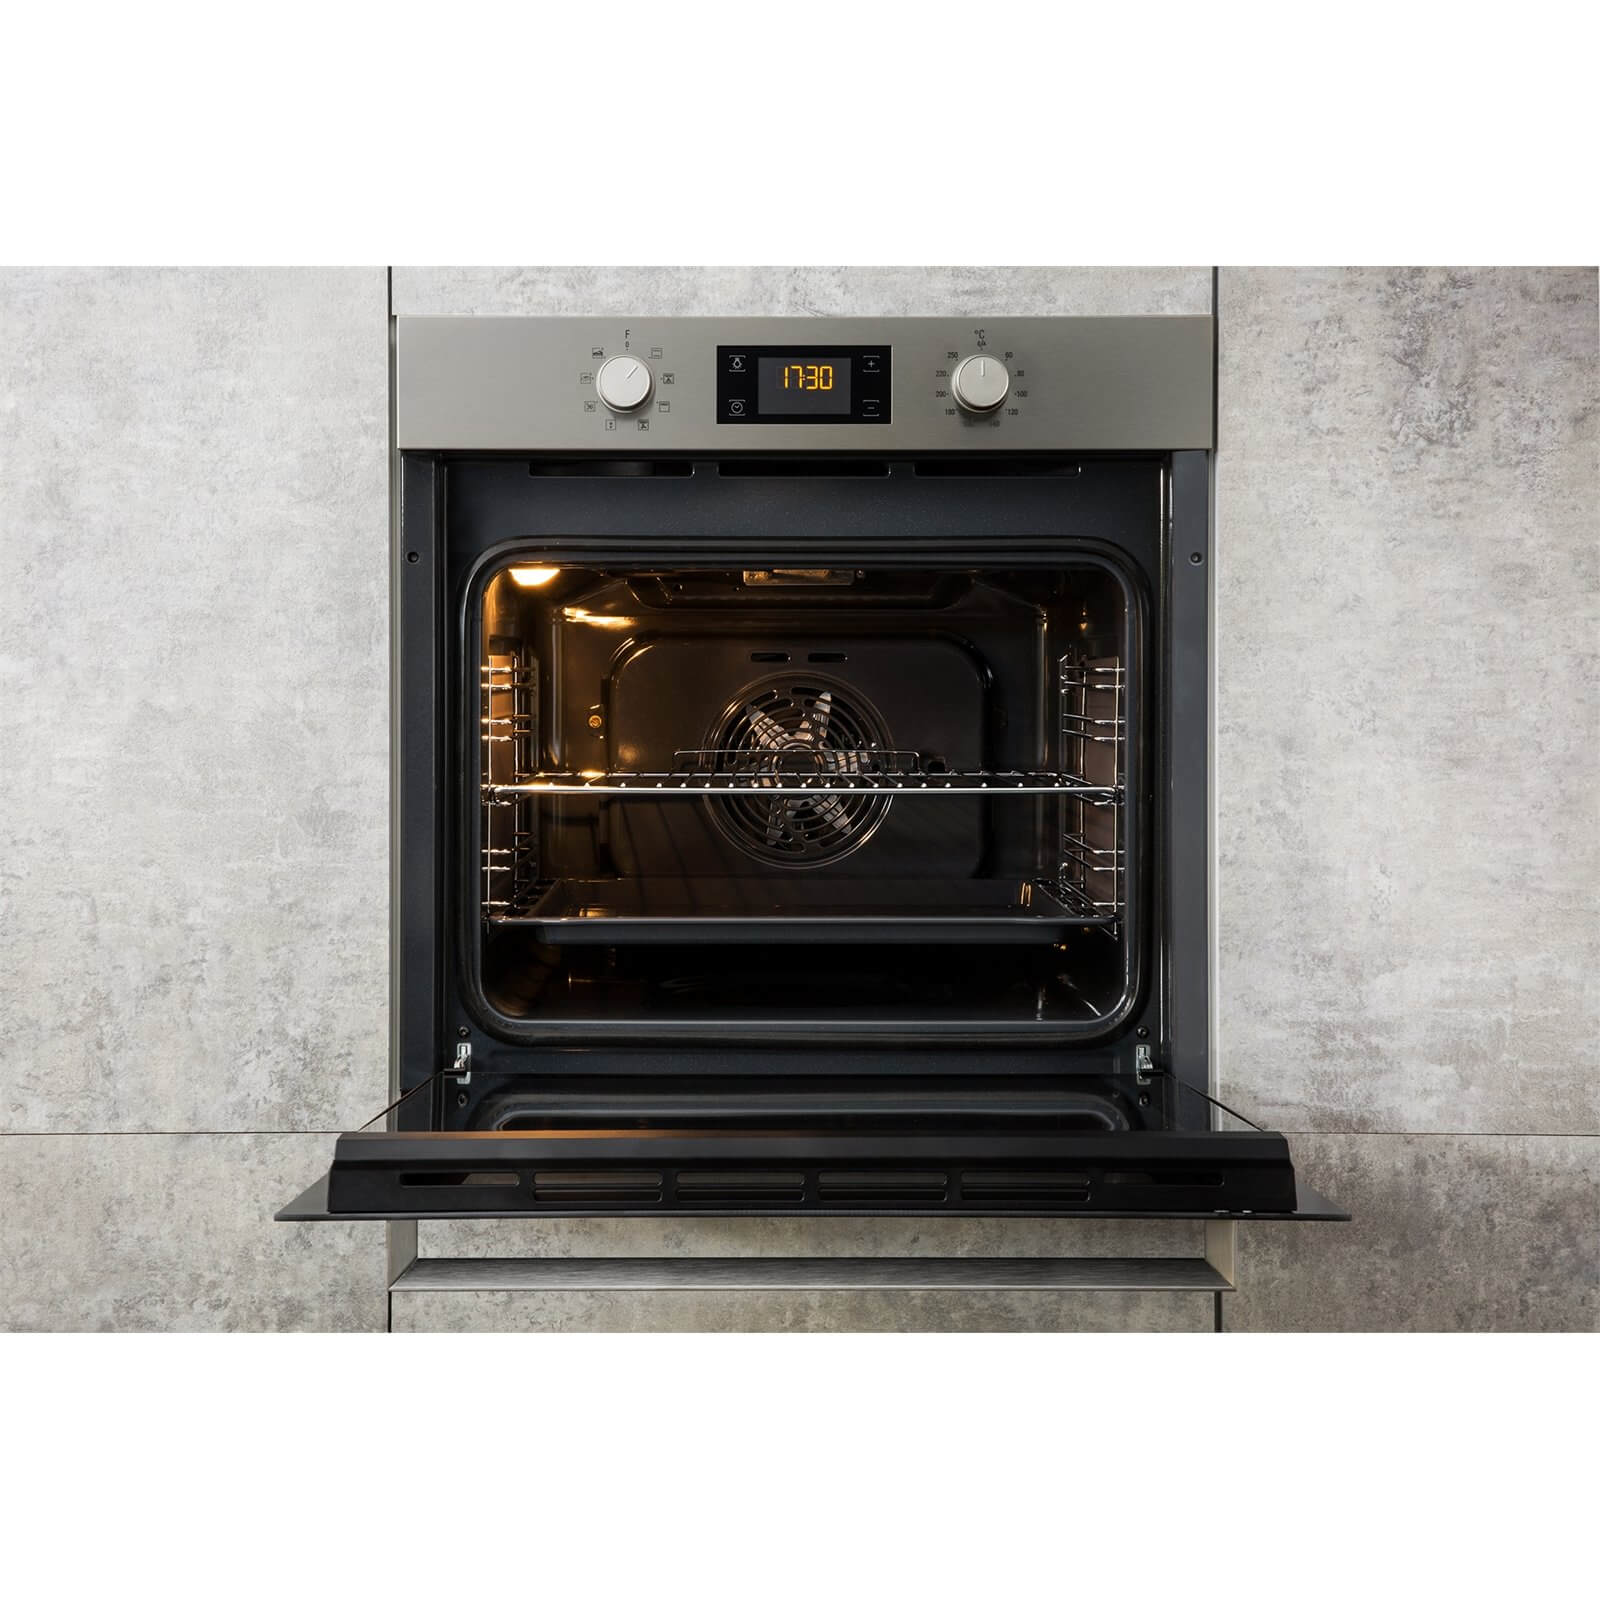 Hotpoint Class 3 SA3 544 C IX Built-in Oven - Stainless Steel